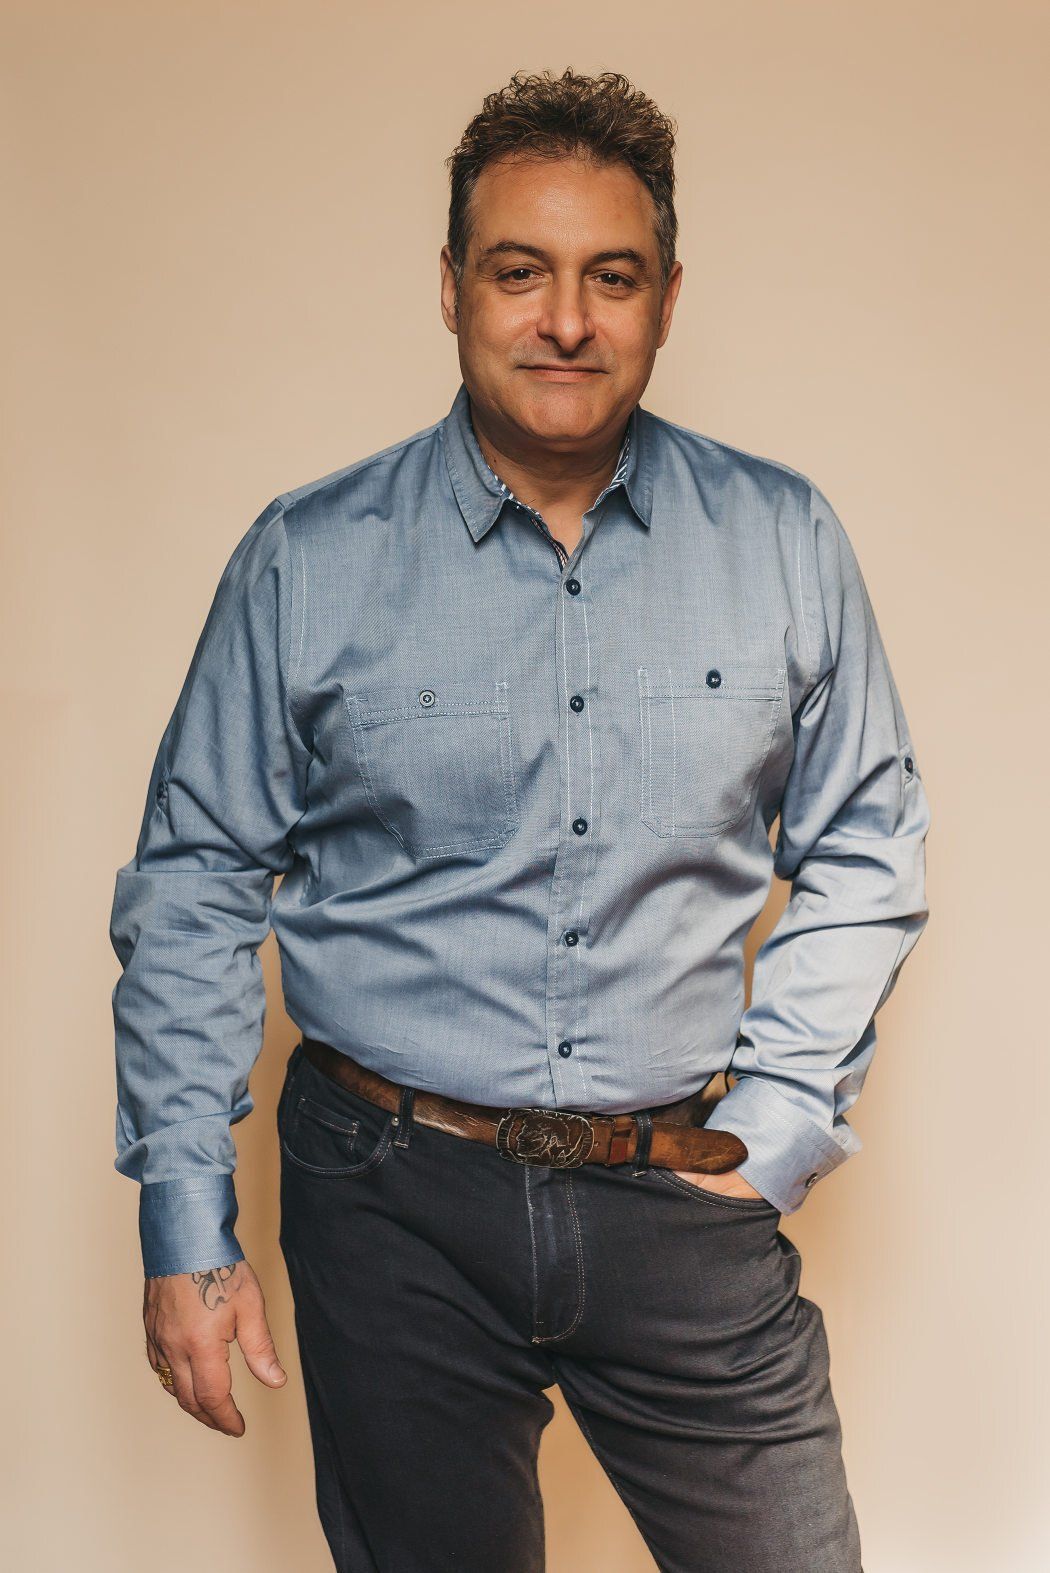 Toronto Greektown business owner with hand in his jean pocket in headshot photo